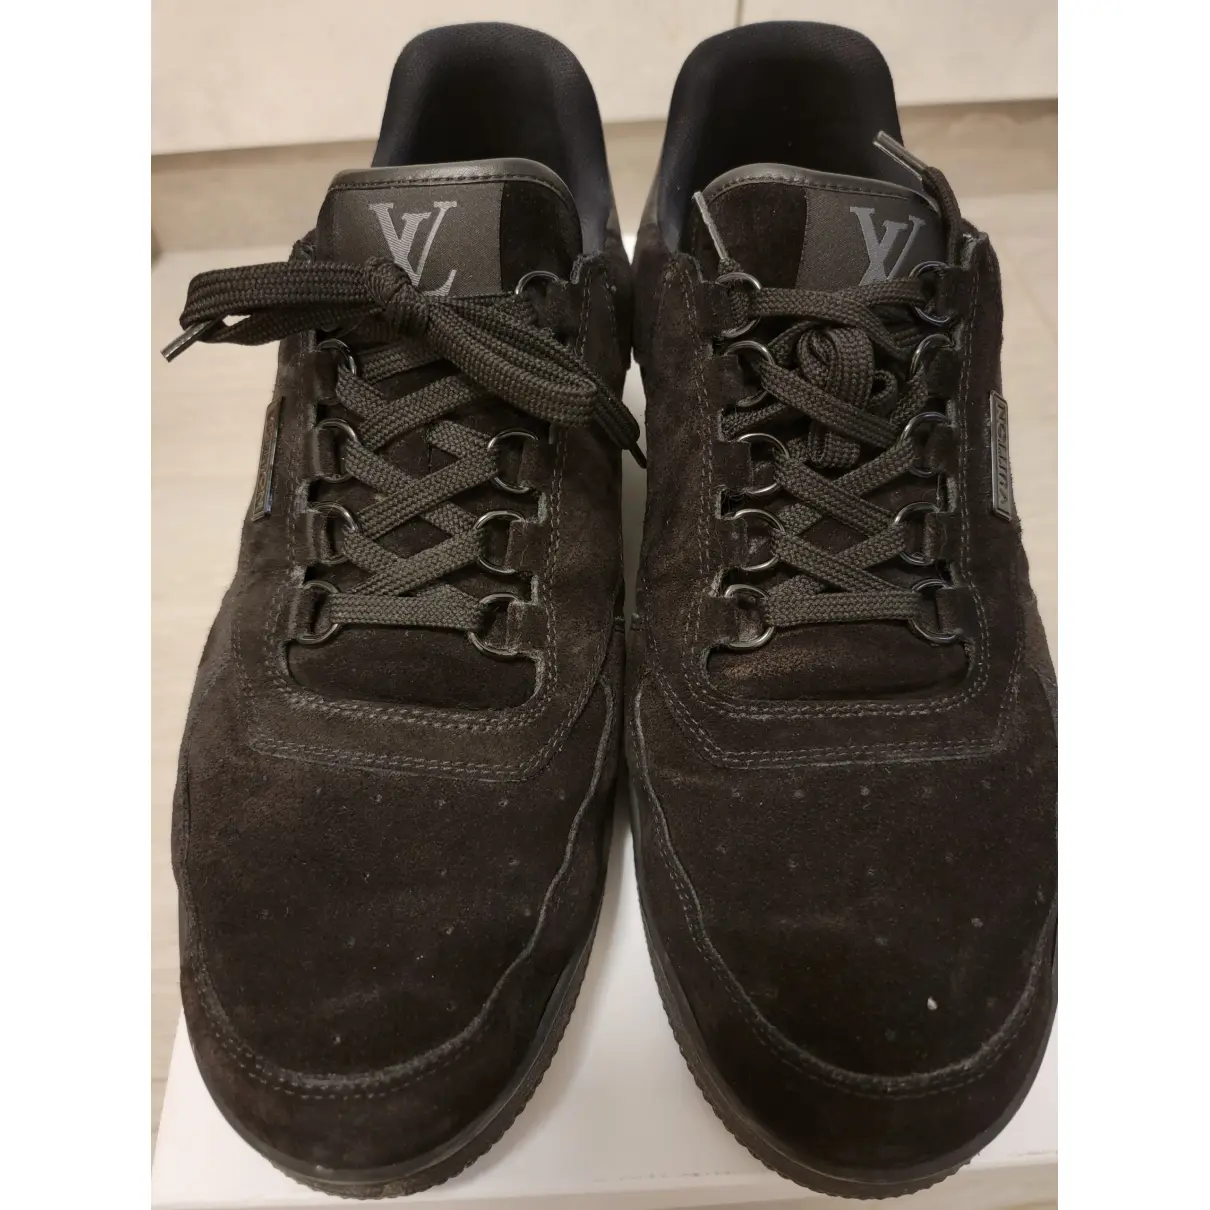 LV Trainer low trainers Louis Vuitton